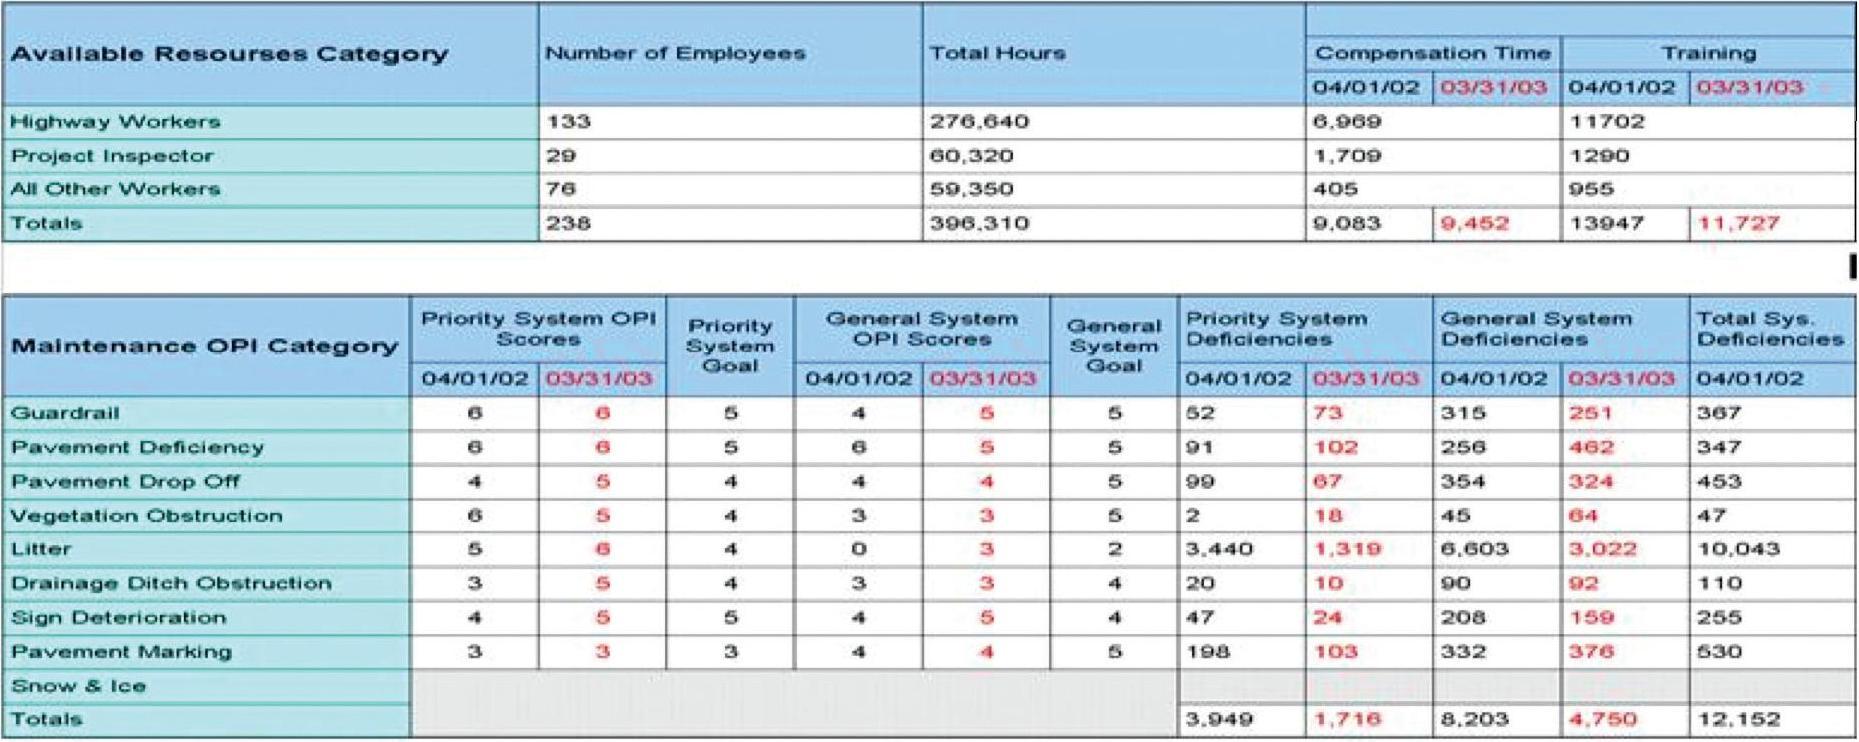 Figure 58 is summary table from one district workplan for the Ohio DOT from 2003. It lists the 238 employees available in this district for a year's worth of maintenance and construction activities. It reports the number of labor hours available. It also reports the maintenance conditions by category. The resources for labor, materials and small contracts are planned and distributed to address the maintenance deficiencies. The worksheet matches investment of resources to the deficiencies in the district.